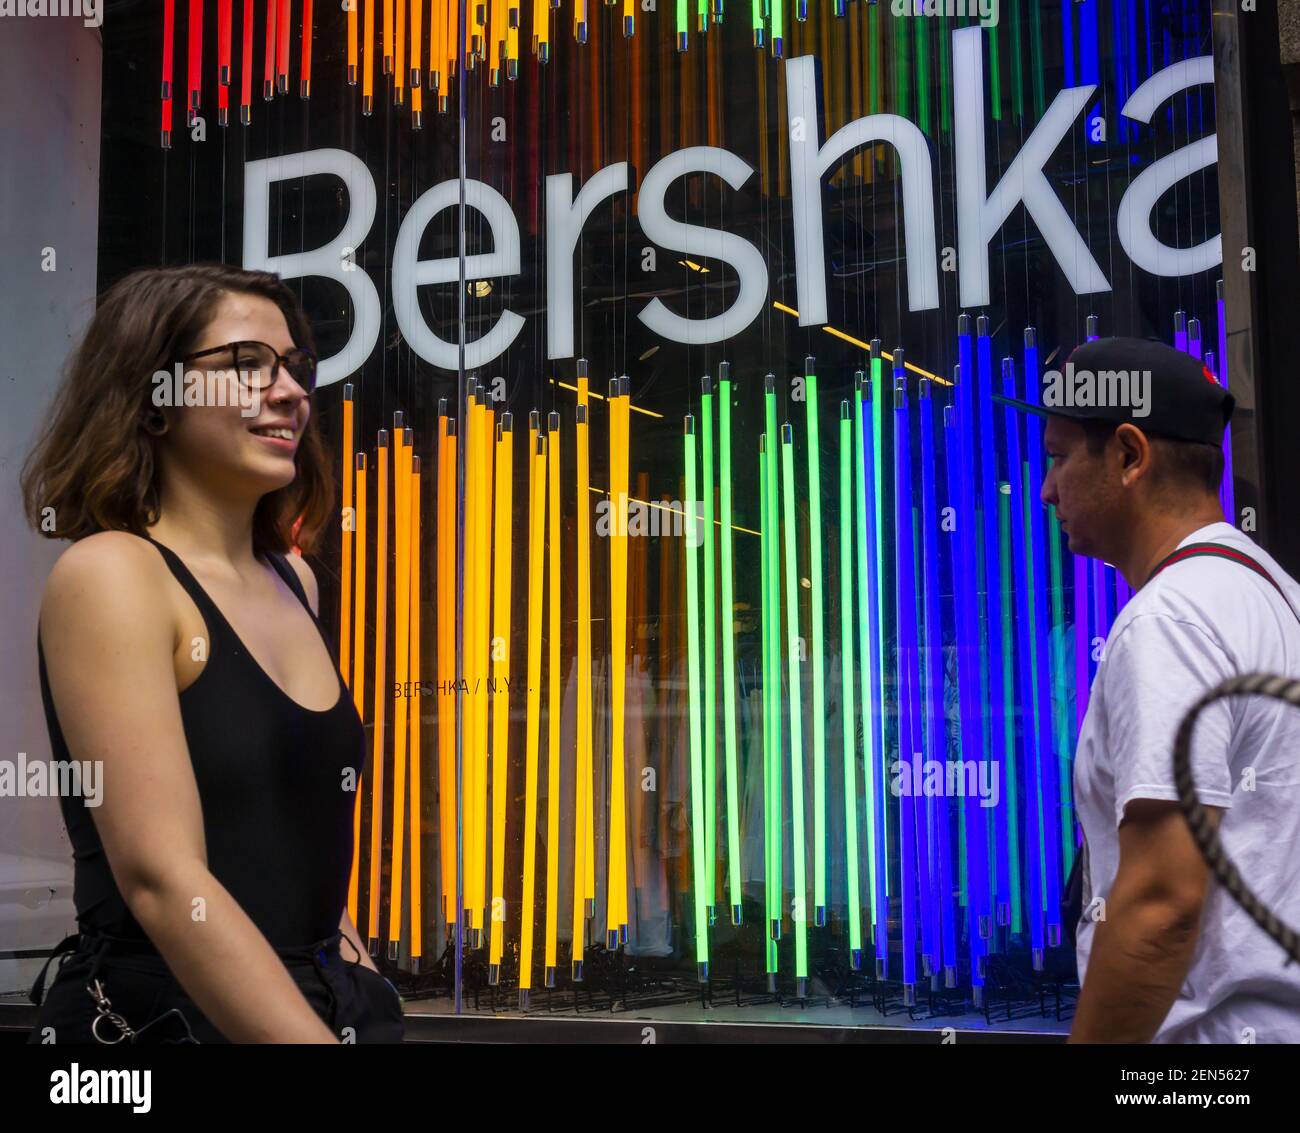 Shoppers pass a Bershka clothing store in Soho in New York on Friday, June  7, 2019. The chain is owned by Spanish retail giant Inditex, one of the  largest clothing retailers in